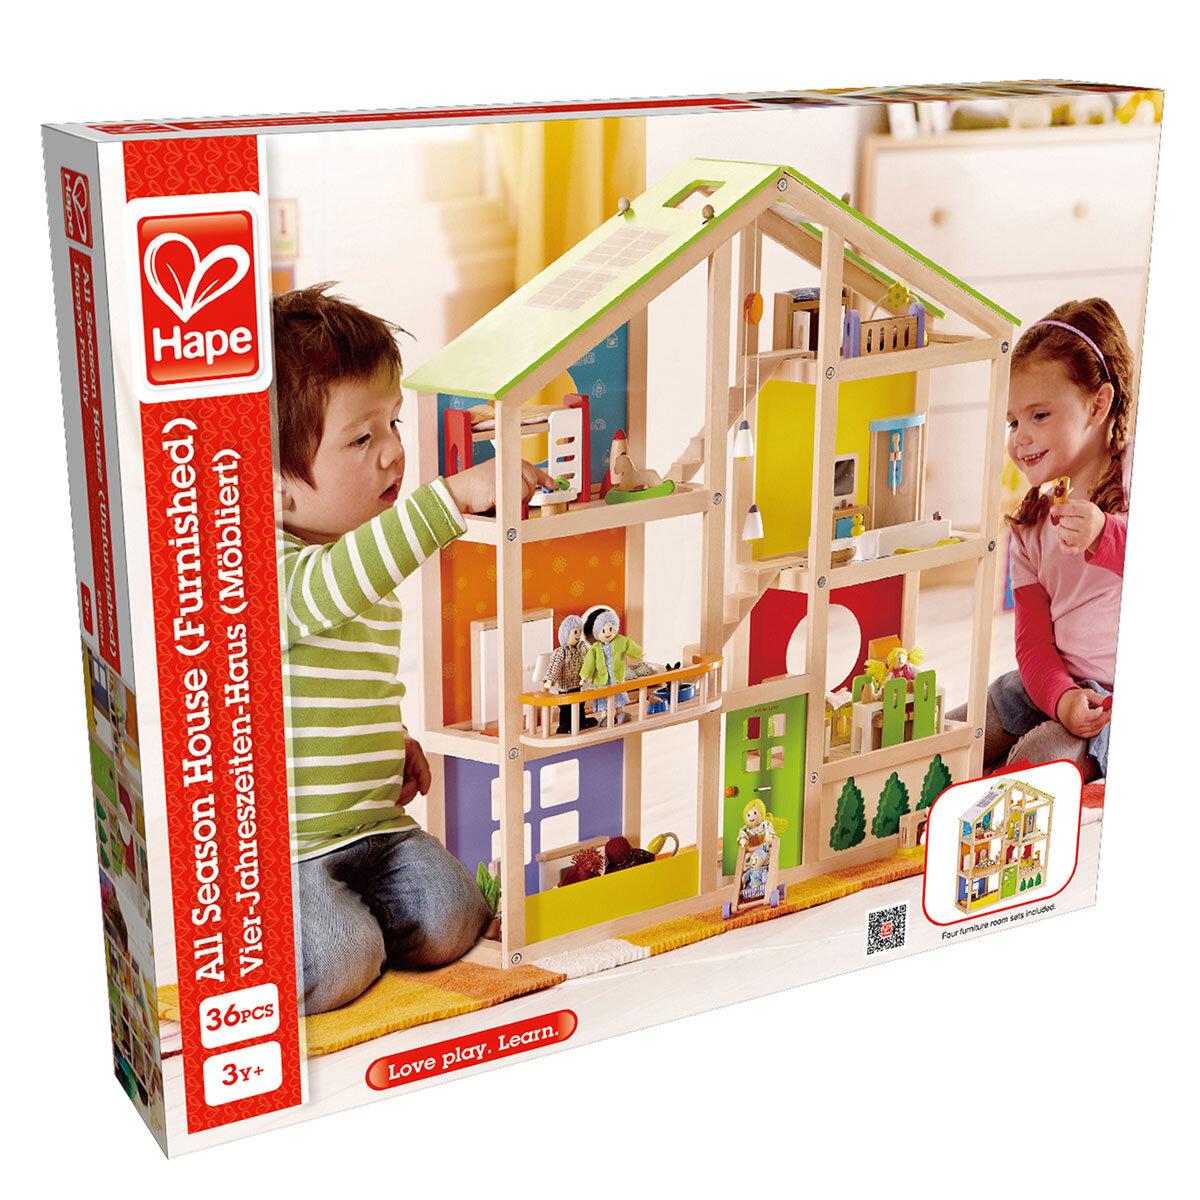 Hape E3401 All Season House Fully Furnished Wooden Dolls House 